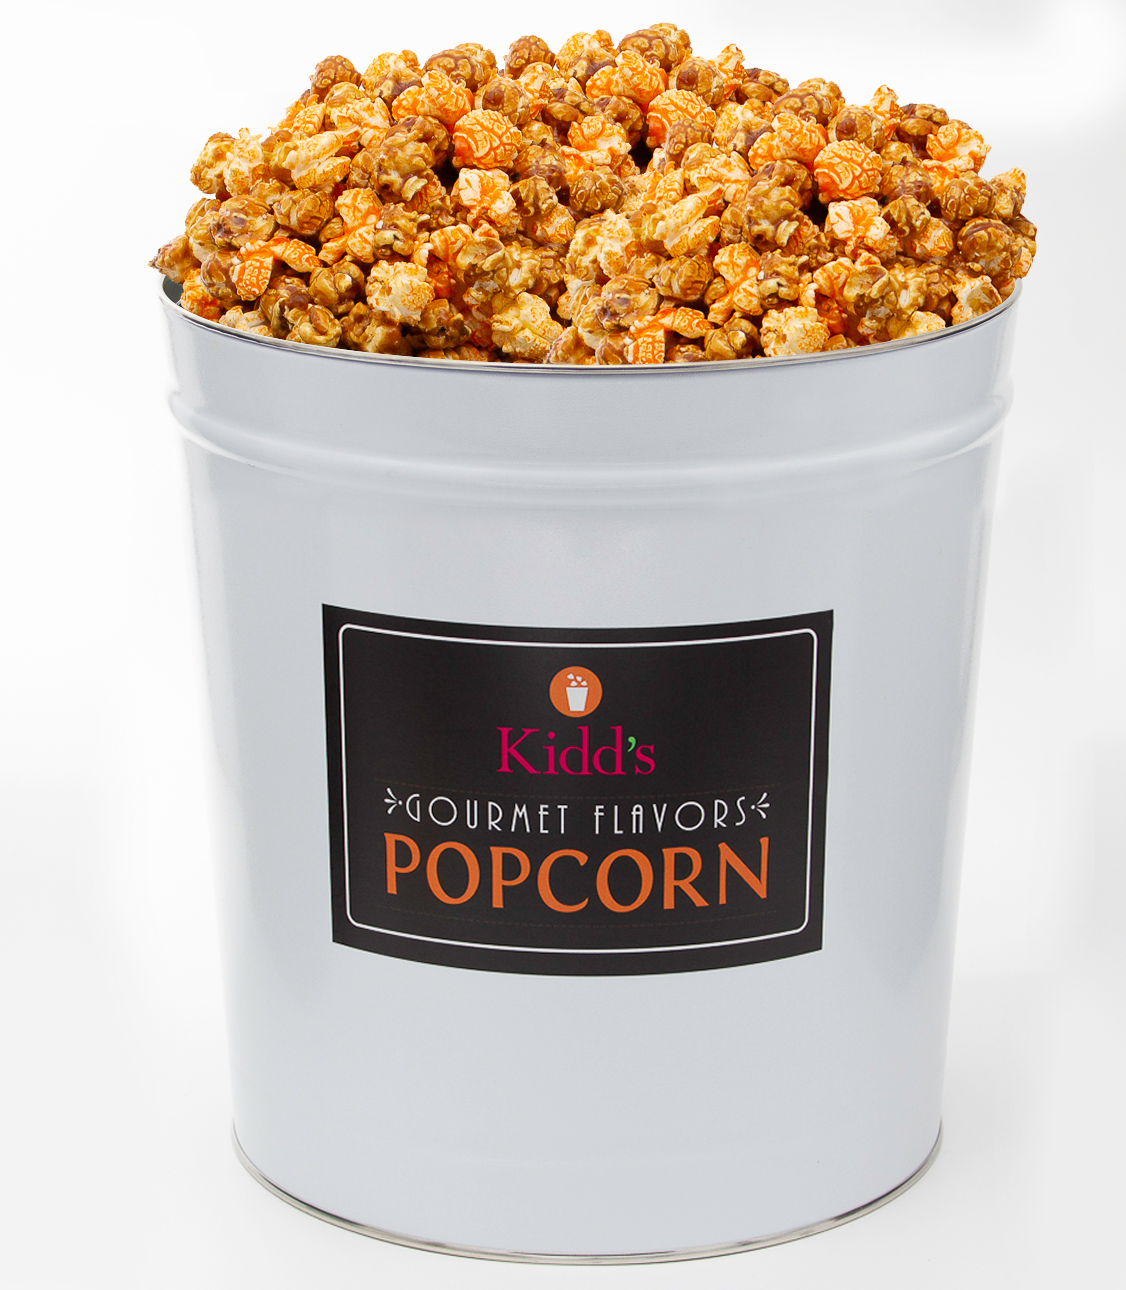 Buy 50% off Large Chicago Style Gourmet Popcorn. Sold in our Signature Black Label Tin. Award Winning Caramel and Cheddar Mix will not disappoint.